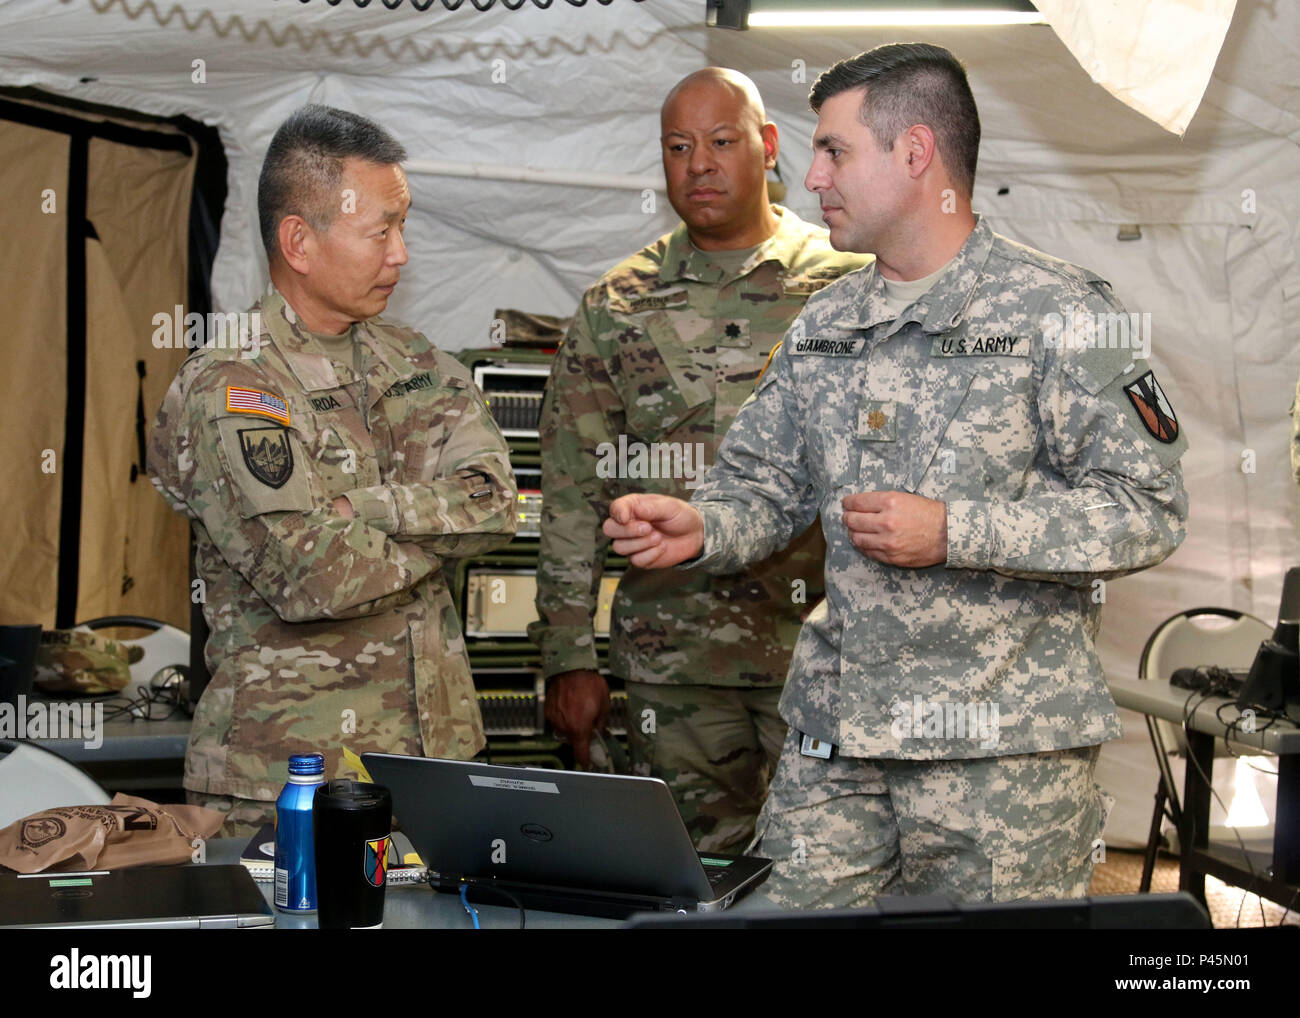 Brig. Gen. Stephen K. Curda (left), Commander, 9th Mission Support Command, Lt. Col. Frank E. Hopkins, deputy commander, 303rd Maneuver Enhancement Brigade (MEB), visits with Maj. Jamie R. Giambrone, communications officer in charge, 303rd MEB, during a visit to the S-6 shop at exercise Imua Dawn 2016, Sagamihara, Japan, June 18, 2016.  Imua Dawn 2016 focuses on maneuver support operations and enhancing cooperative capabilities in mobility, Humanitarian Assistance and Disaster Relief (HADR), Noncombatant Evacuation Operations (NEO), and sustainment support in the event of natural disasters and Stock Photo